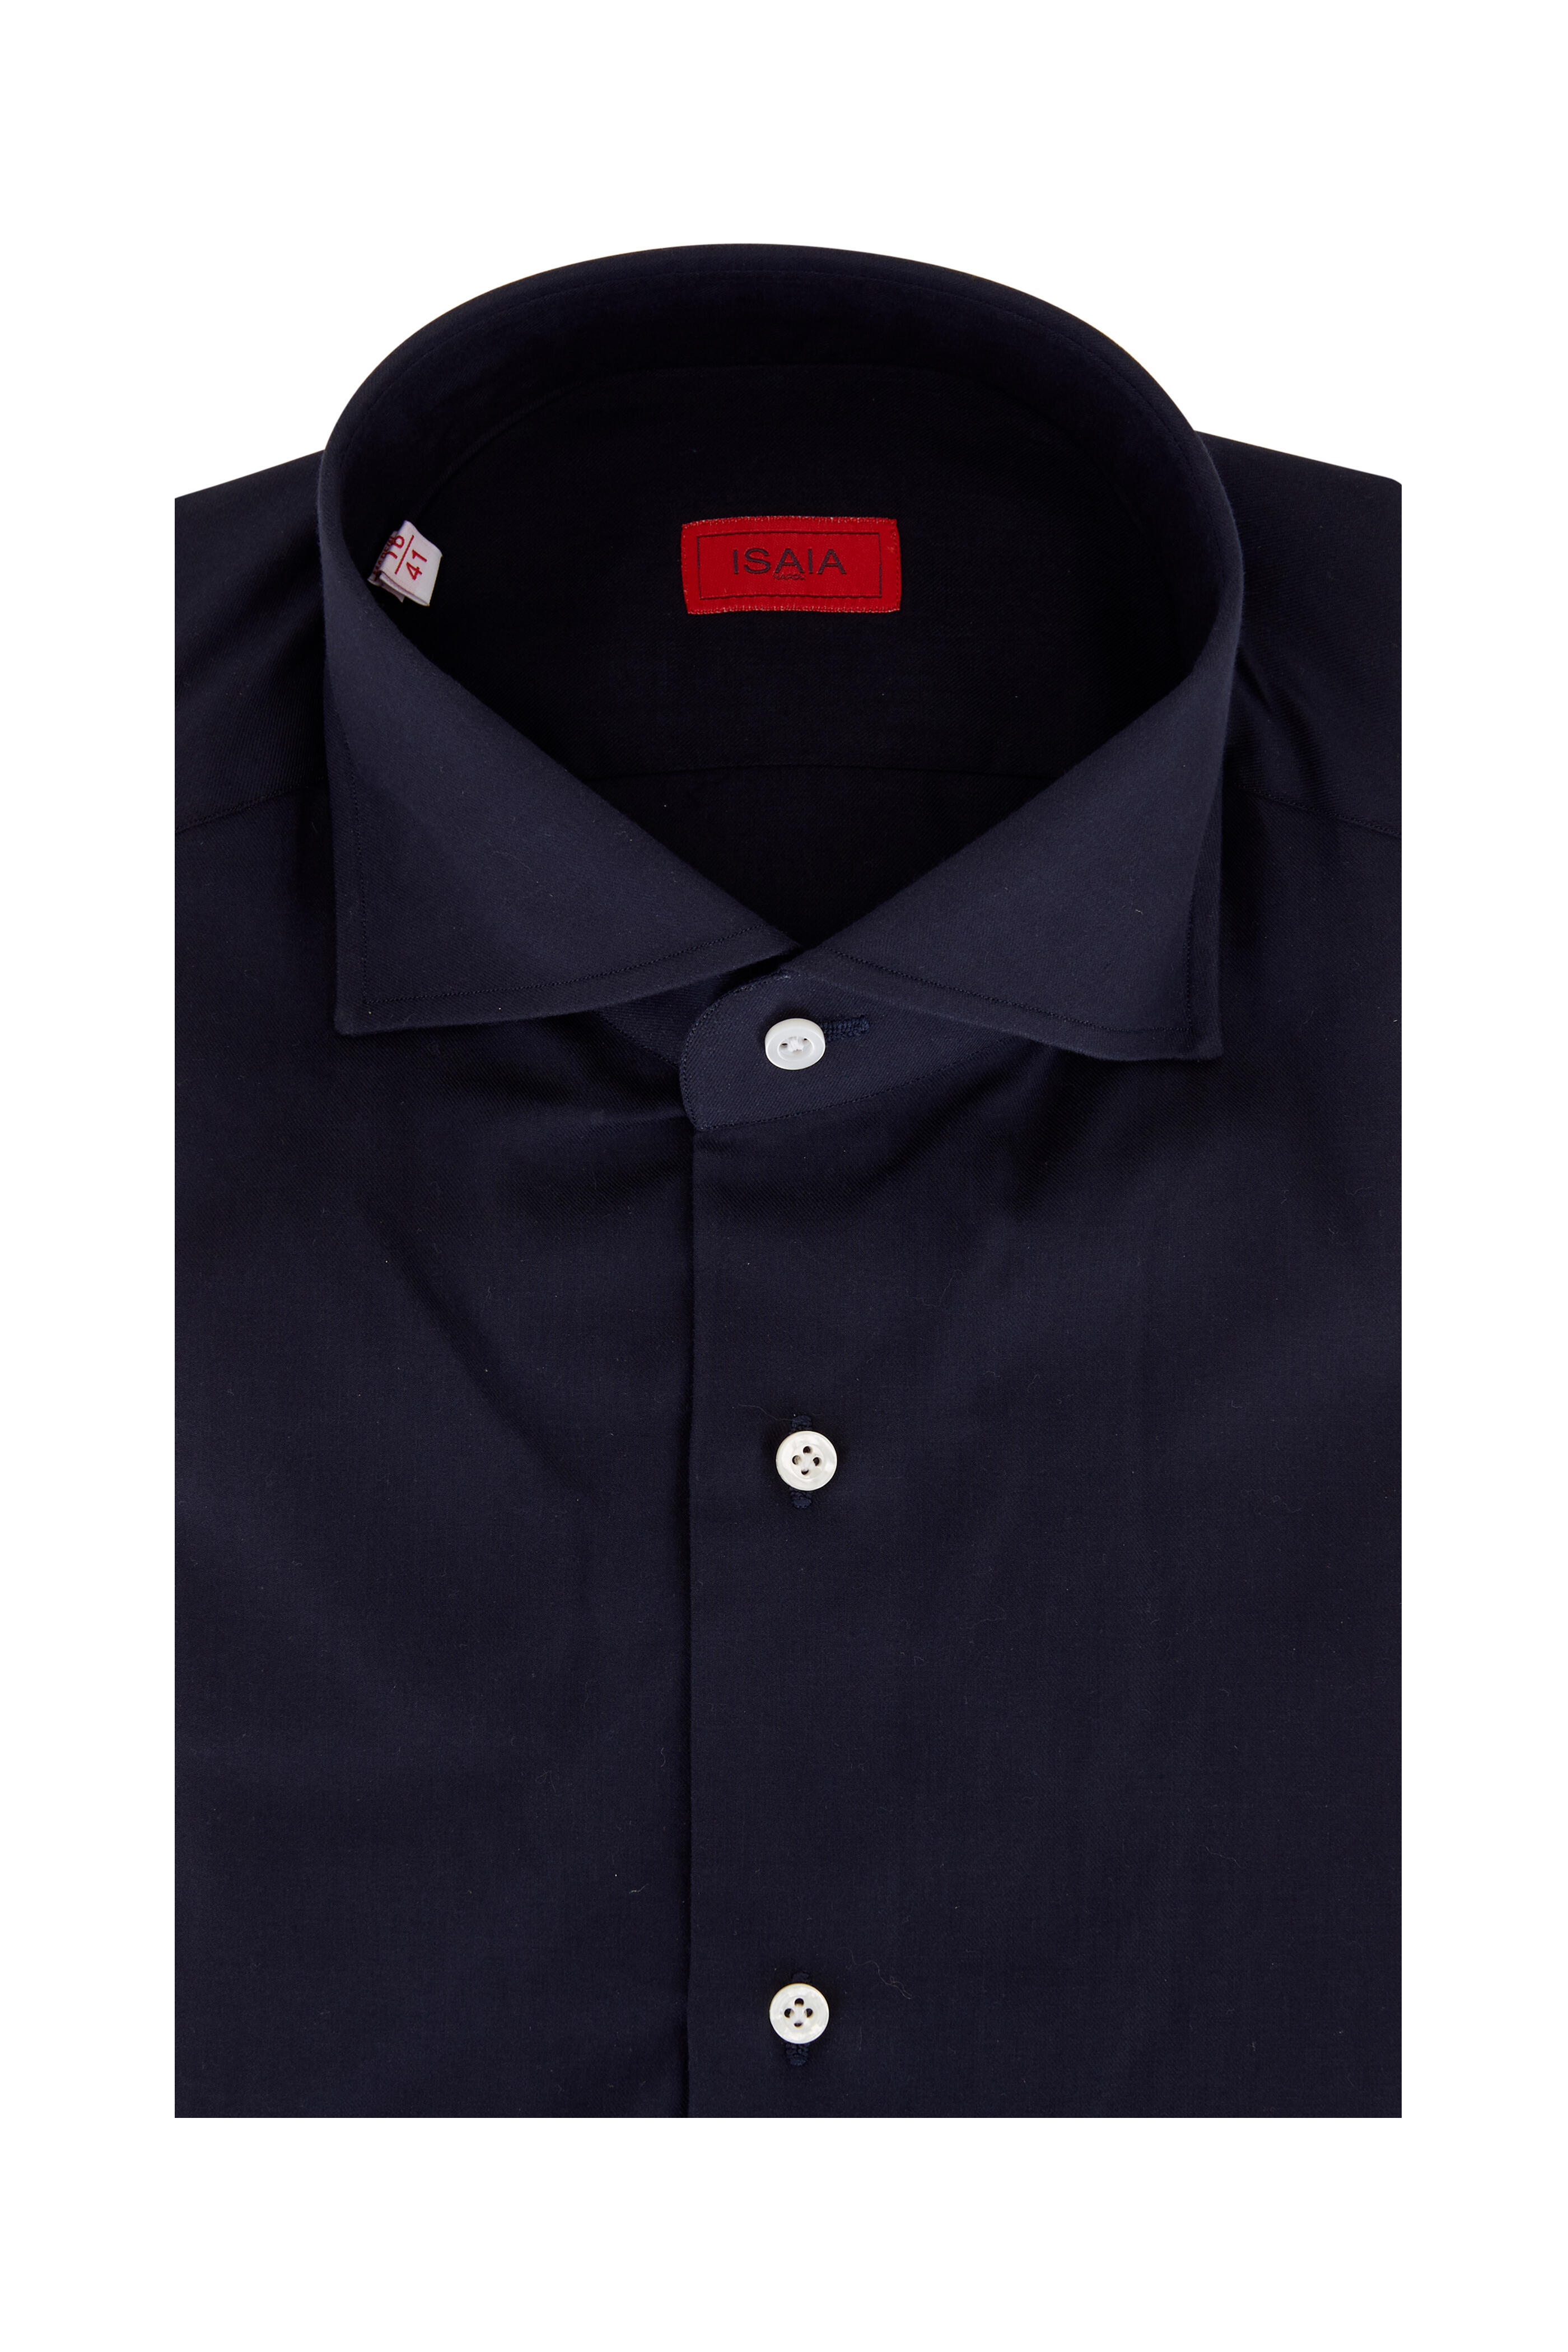 Isaia - Solid Navy Cotton Dress Shirt | Mitchell Stores